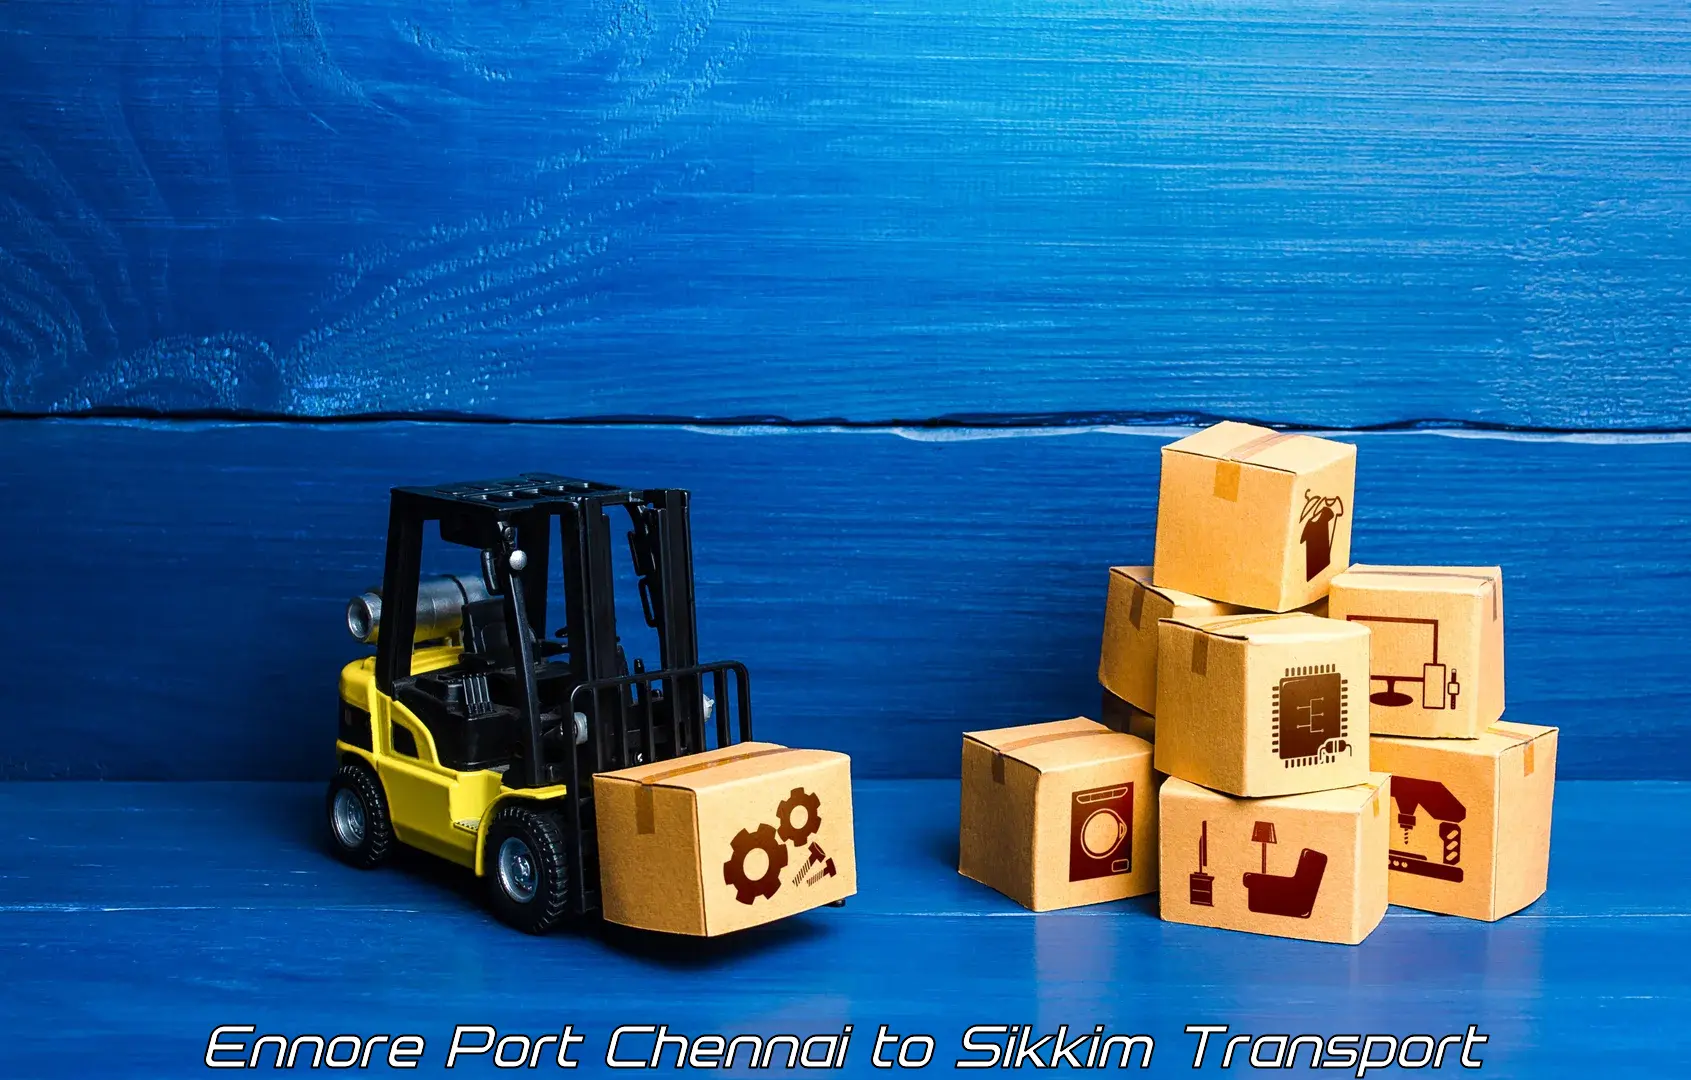 Shipping services in Ennore Port Chennai to Pelling